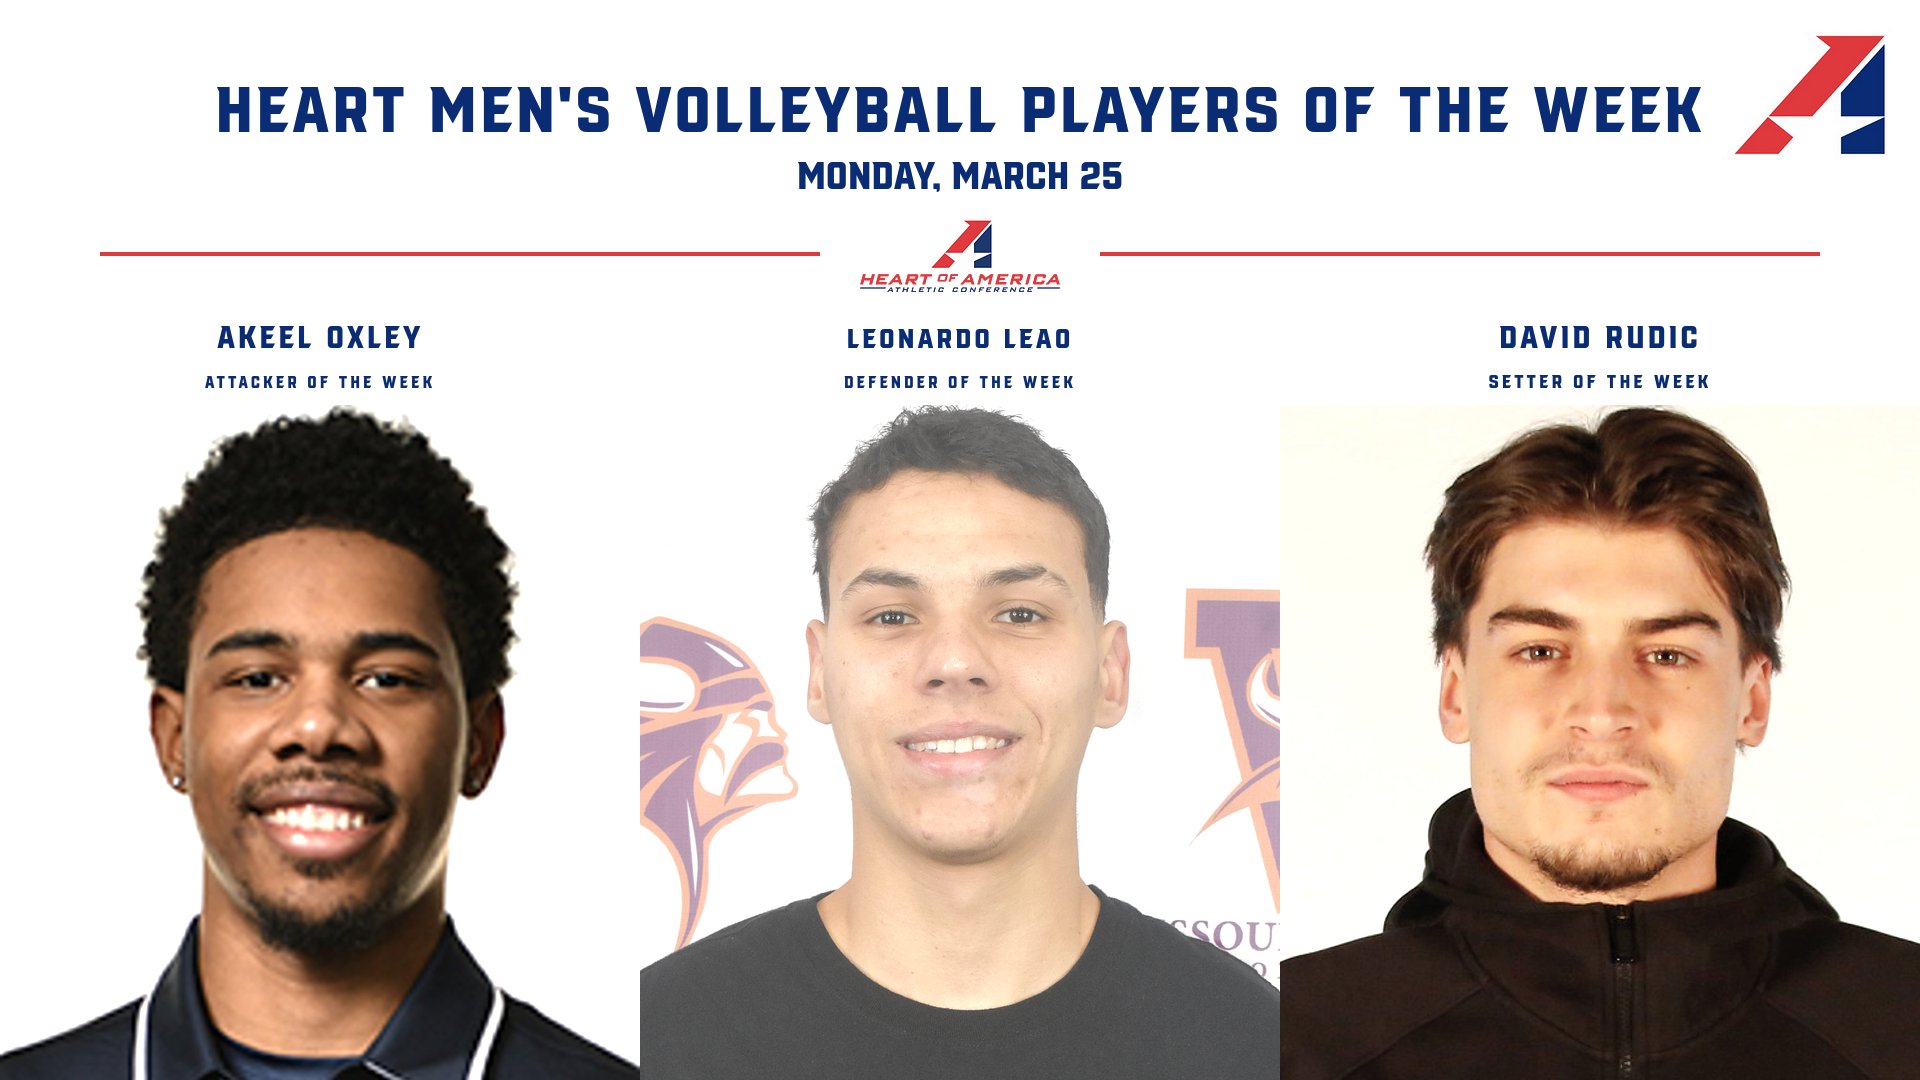 Oxley, Leao, Rudic Selected Heart Men’s Volleyball Players of the Week